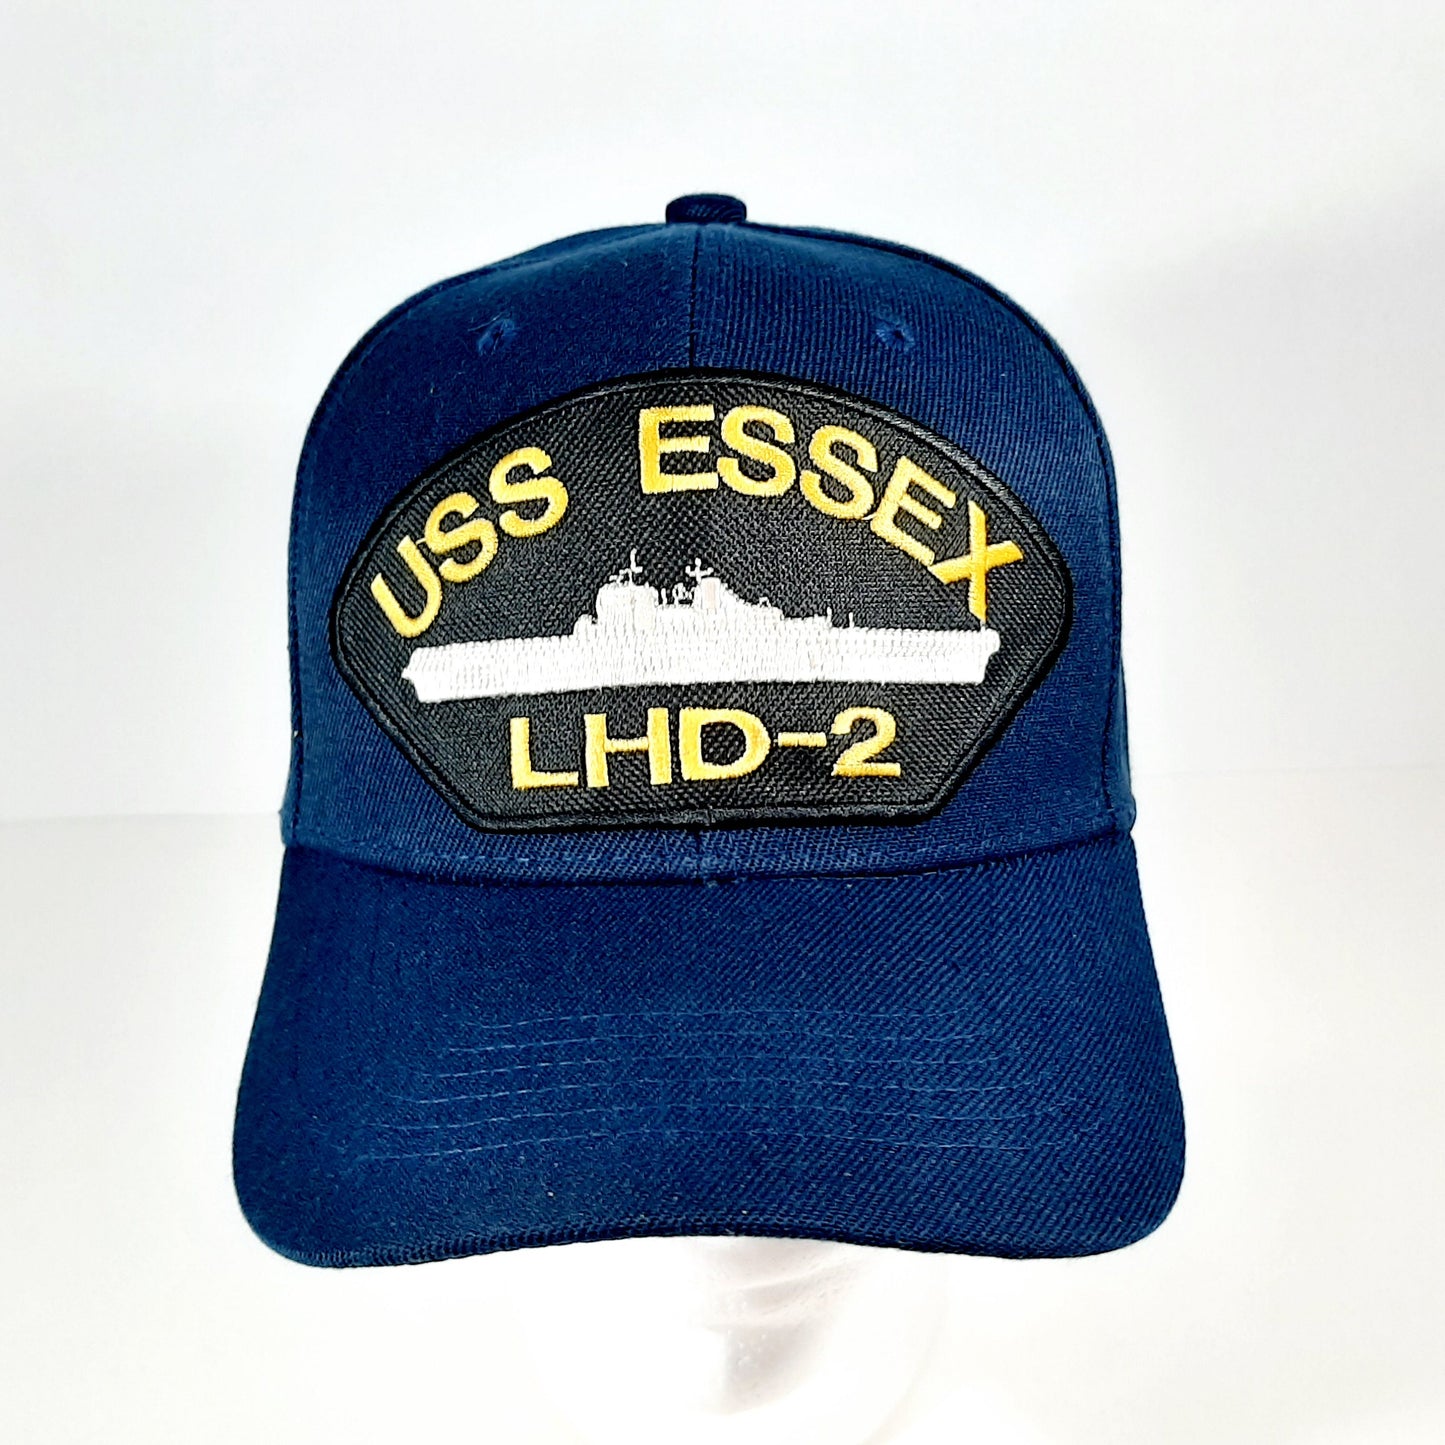 USS Essex LHD-2 Embroidered Patch Cap Baseball Hat Strapback Navy Blue